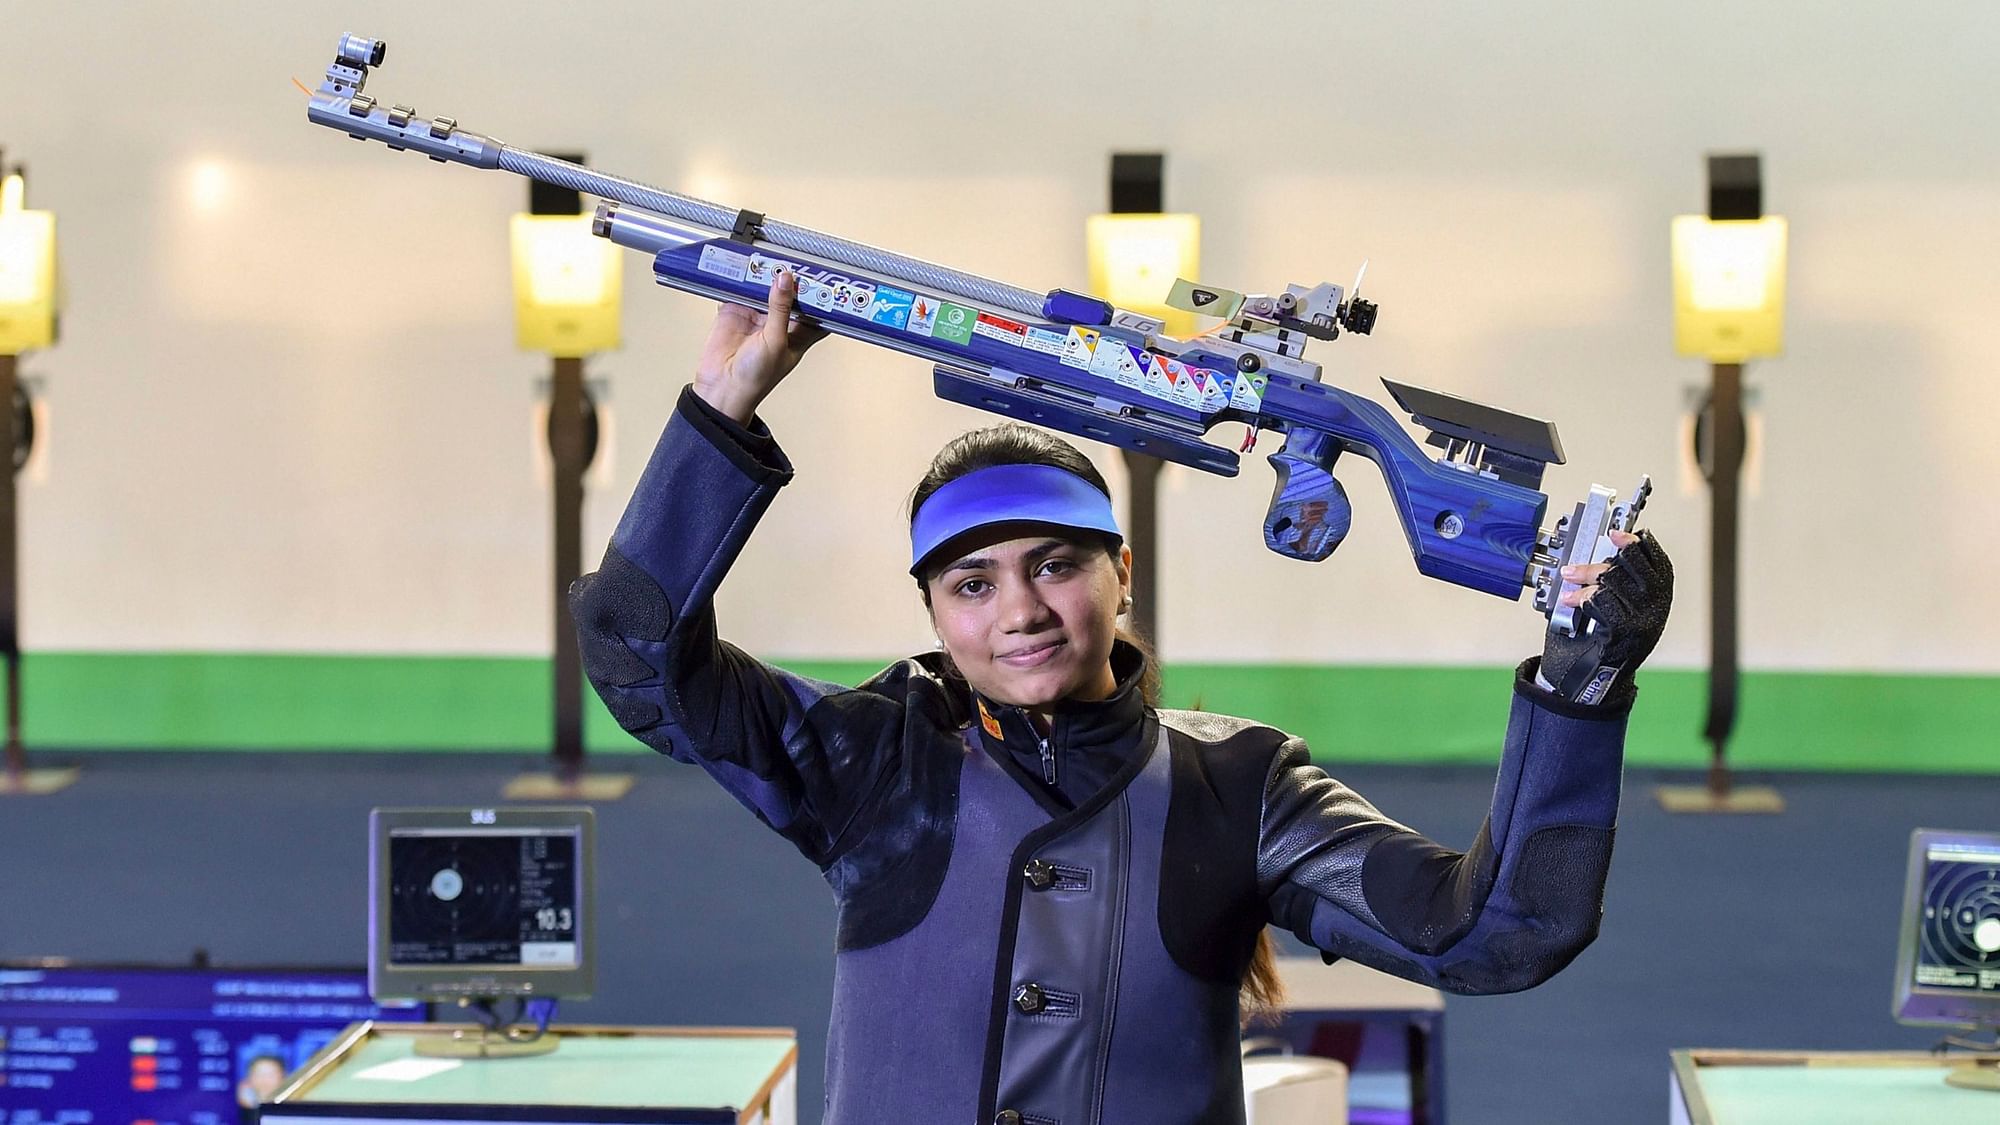 Apurvi Chandela had clinched the women’s 10m Air Rifle gold at the ISSF World Cup in New Delhi in February.